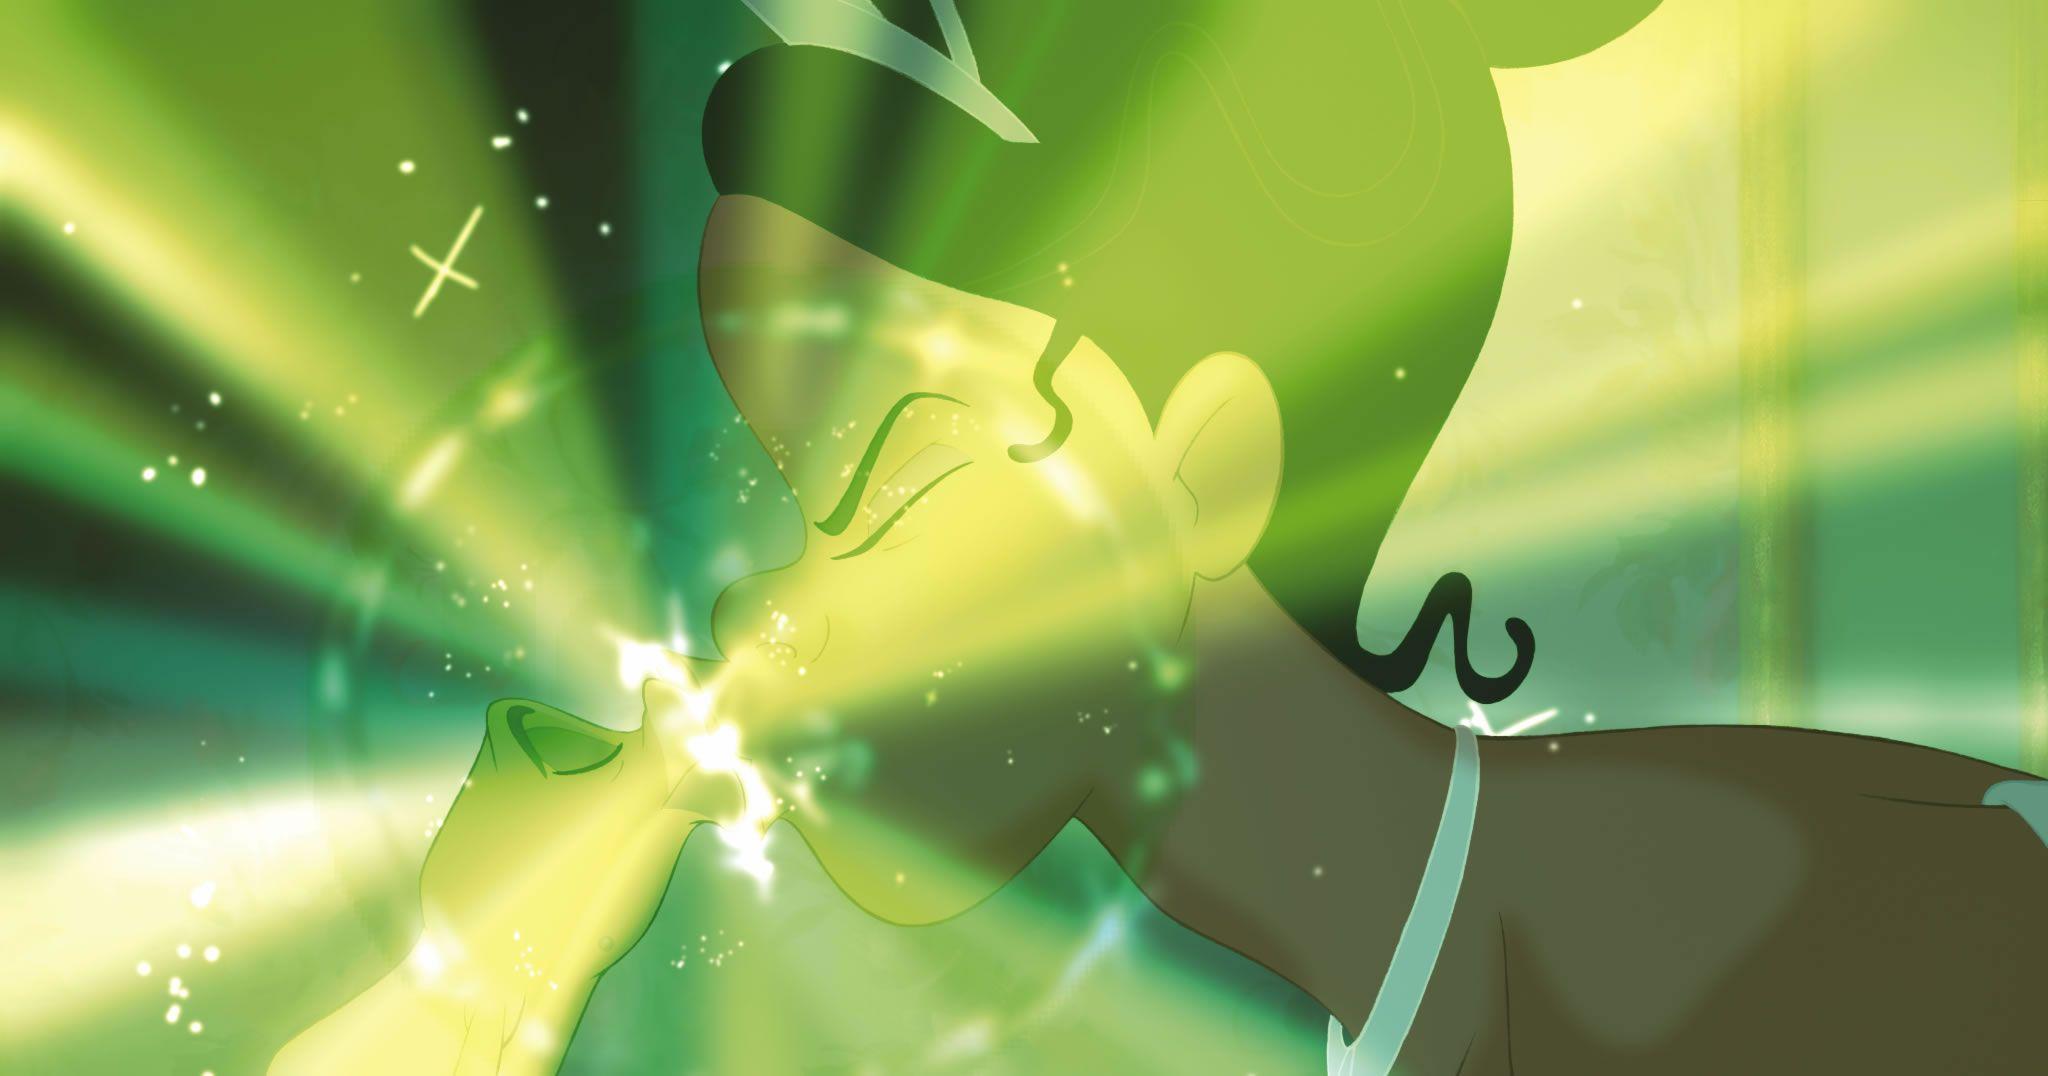 Tiana and Naveen Kiss in Disney's Princess and the Frog Desktop